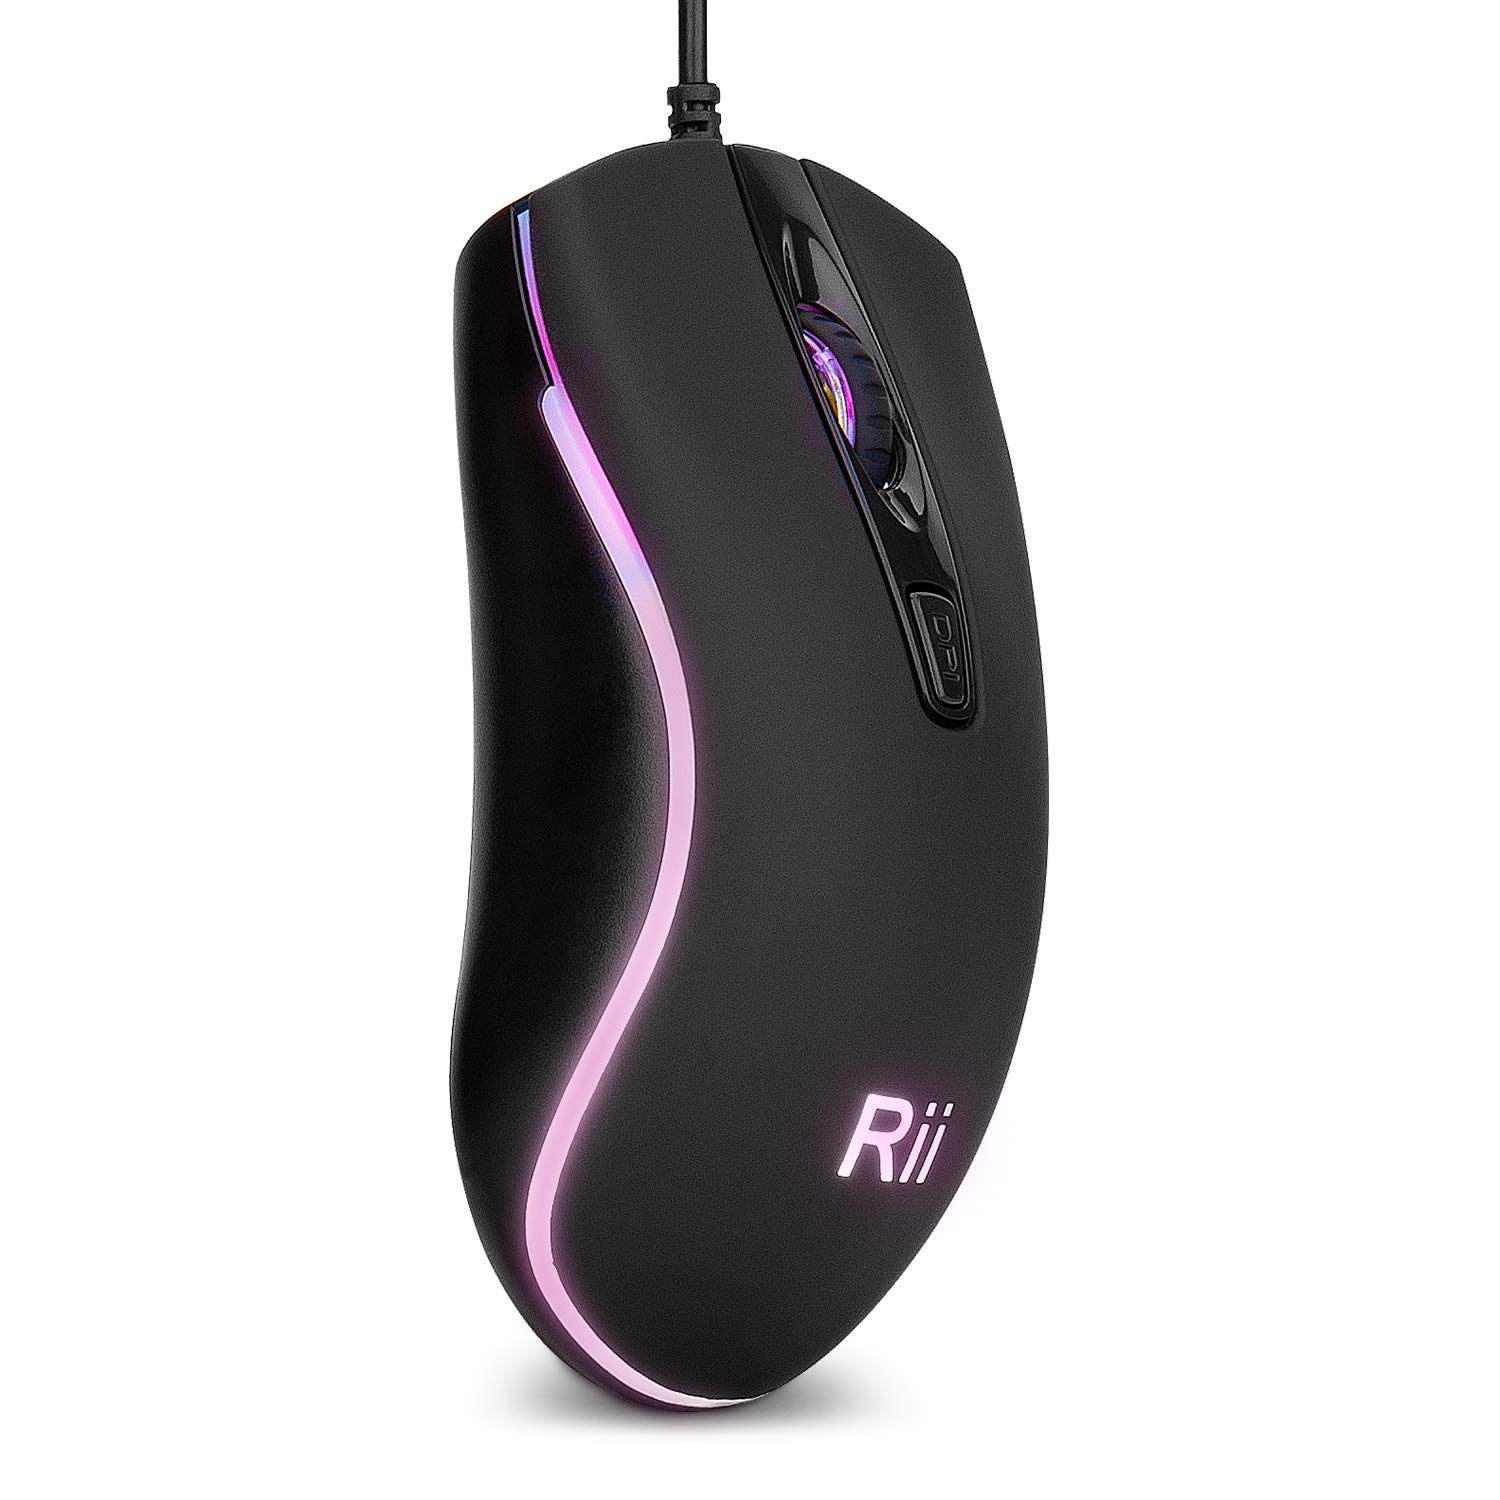 Rii Wired Mouse, RM105 USB Computer Mouse,RGB Optical 1600 DPI Office Mice for PC,Computer,Laptop,Desktop,Windows (10 Pack RGB Backlit)